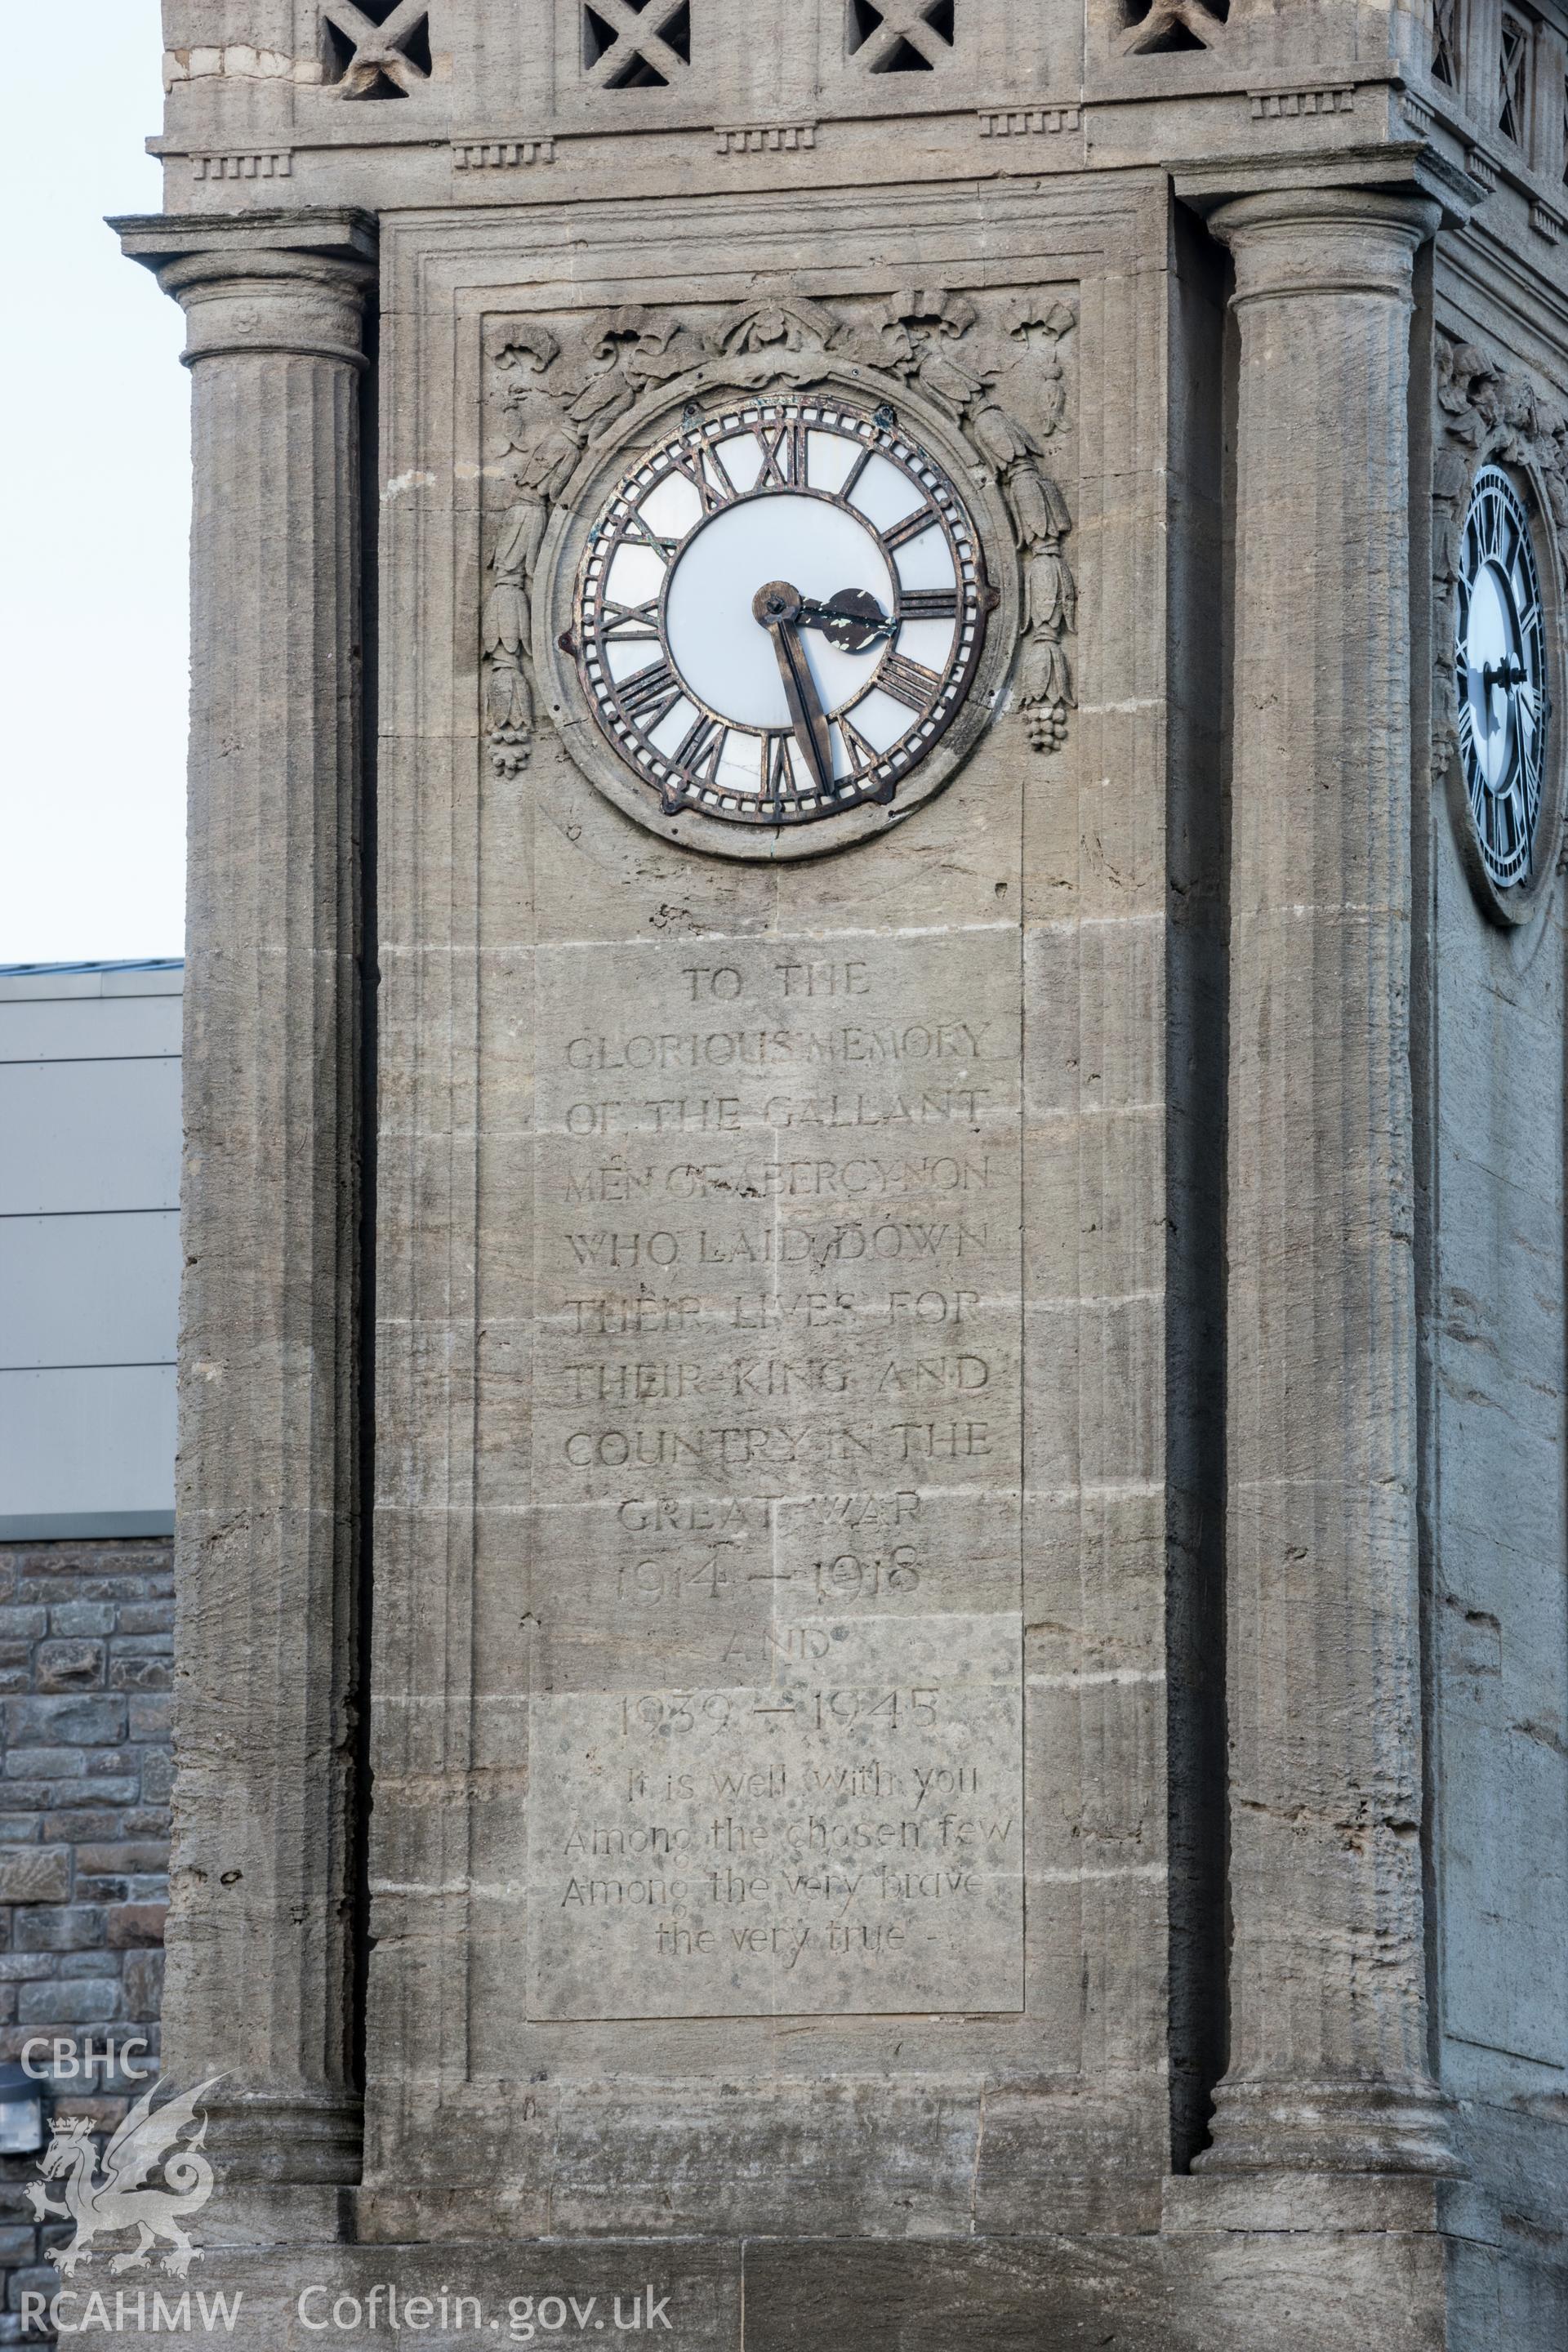 Detail of inscription and clock